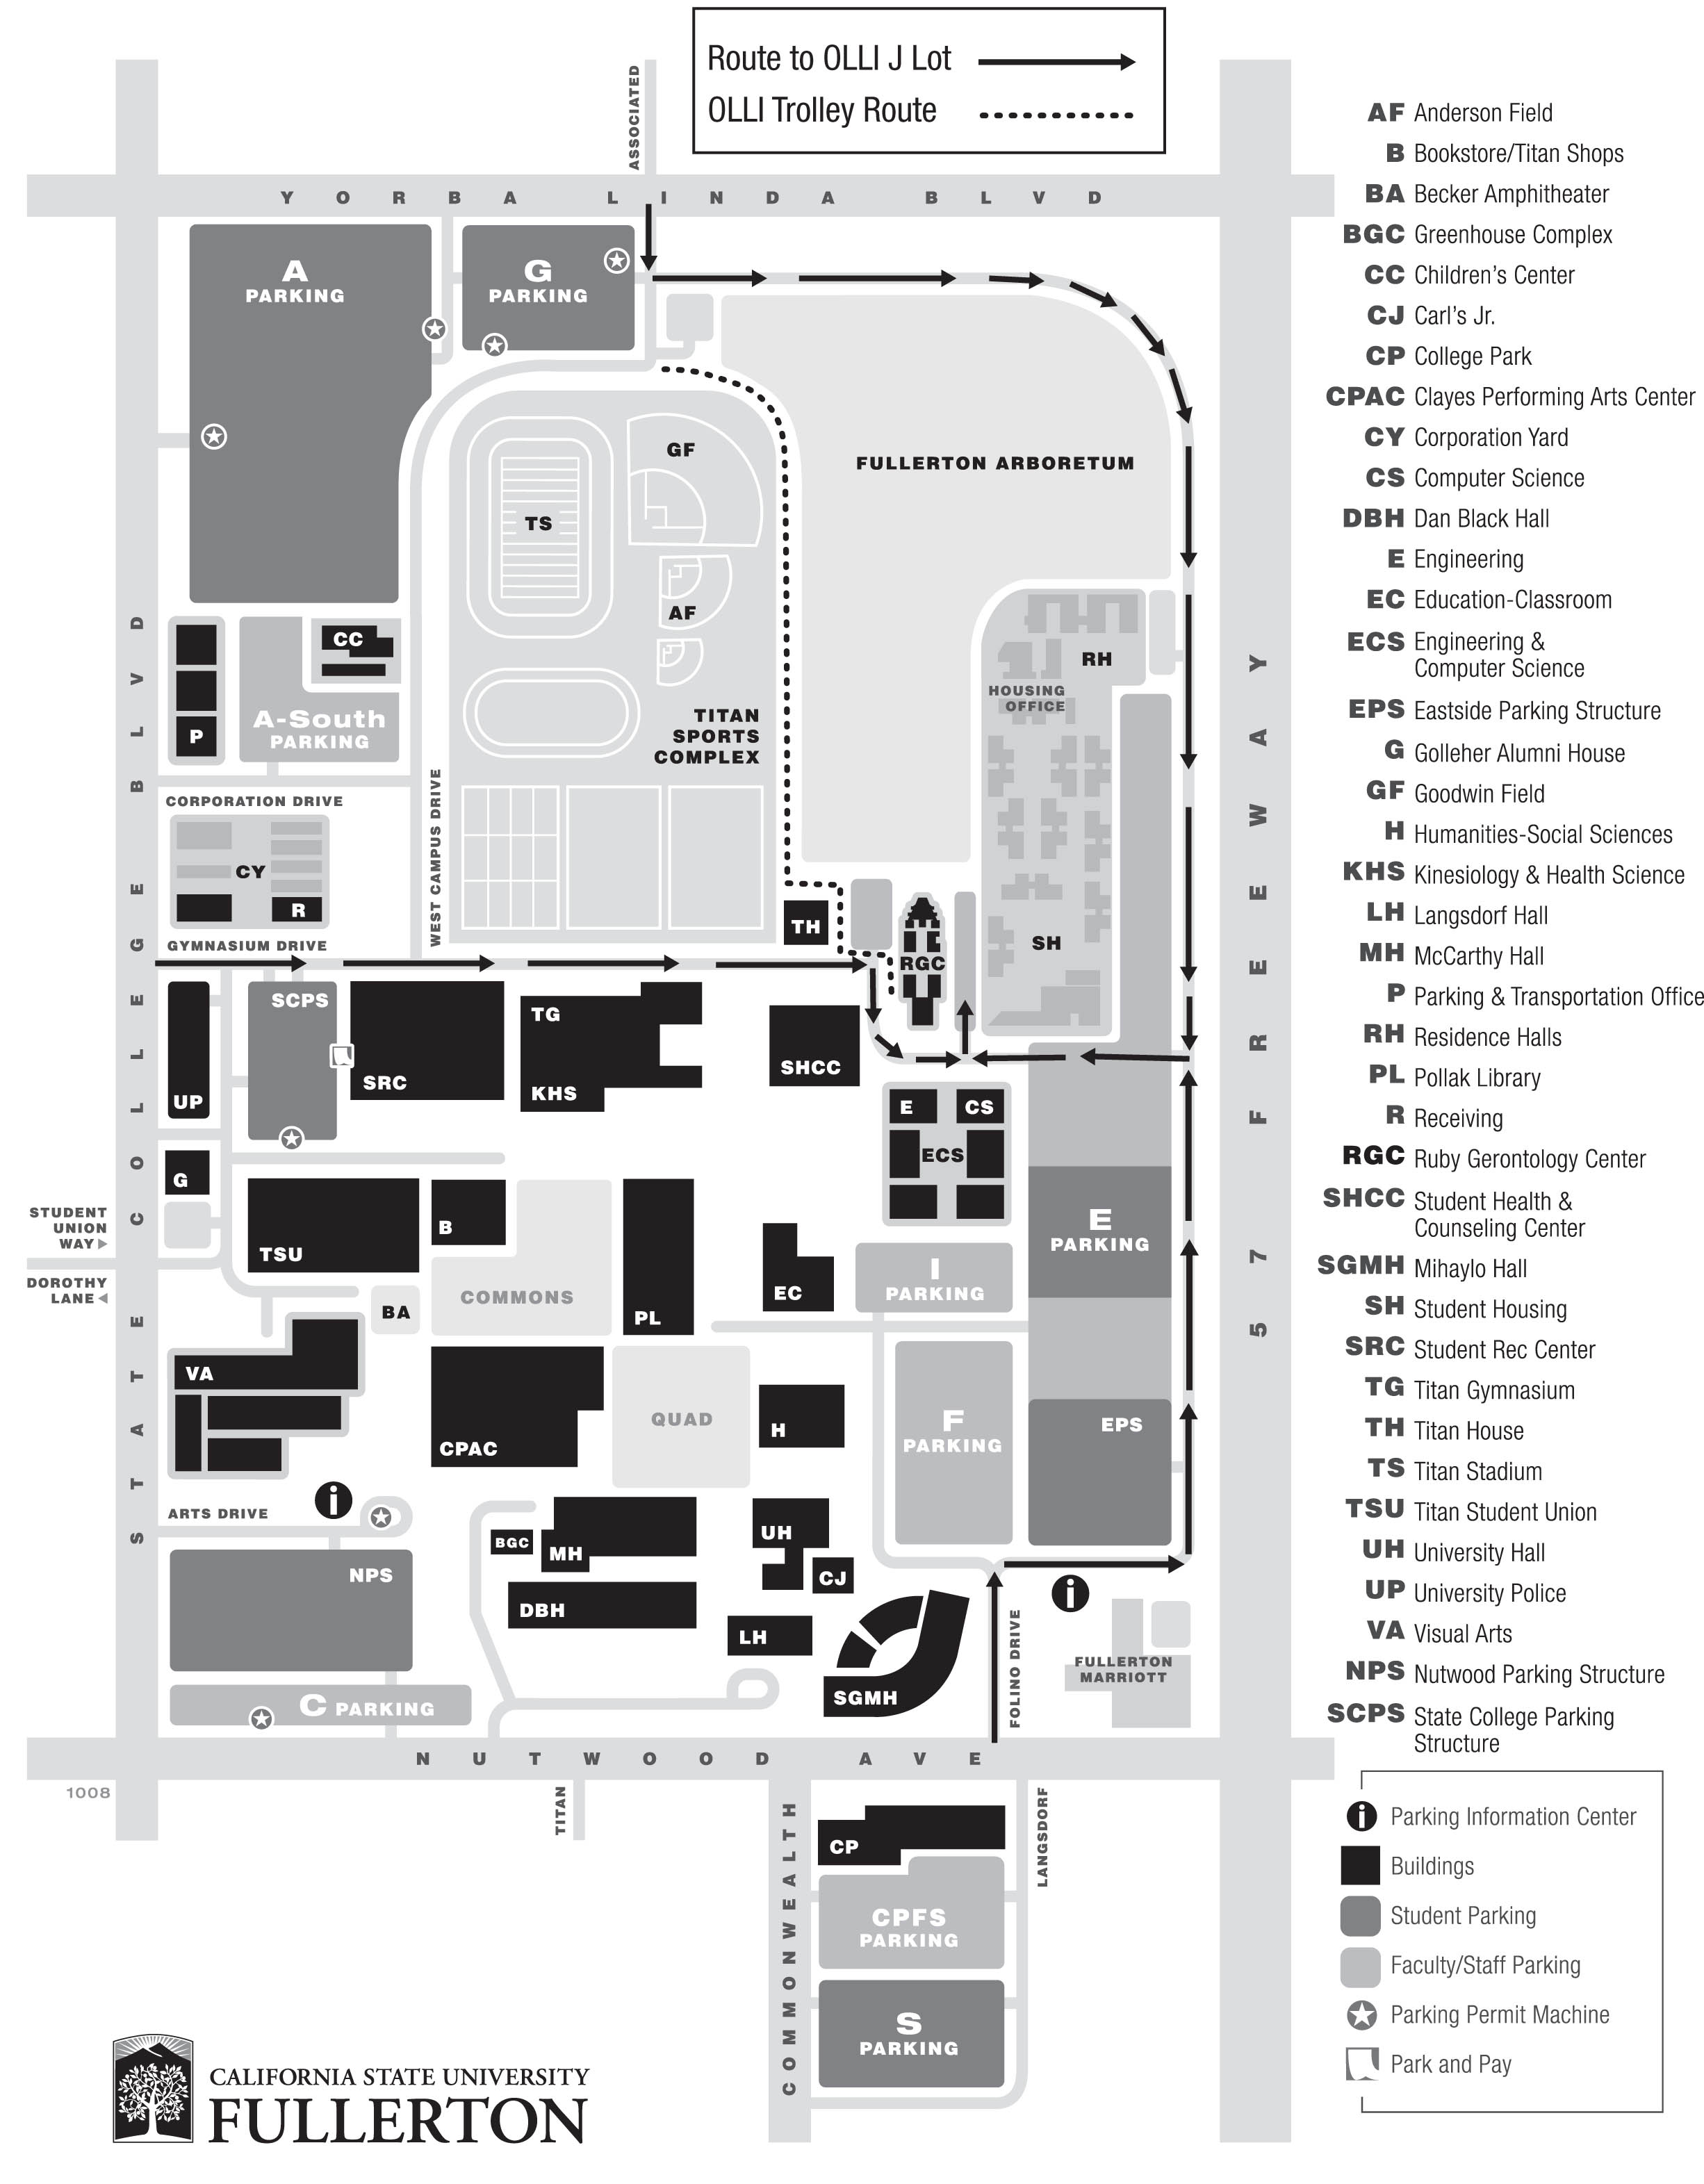 Campus Map to OLLI